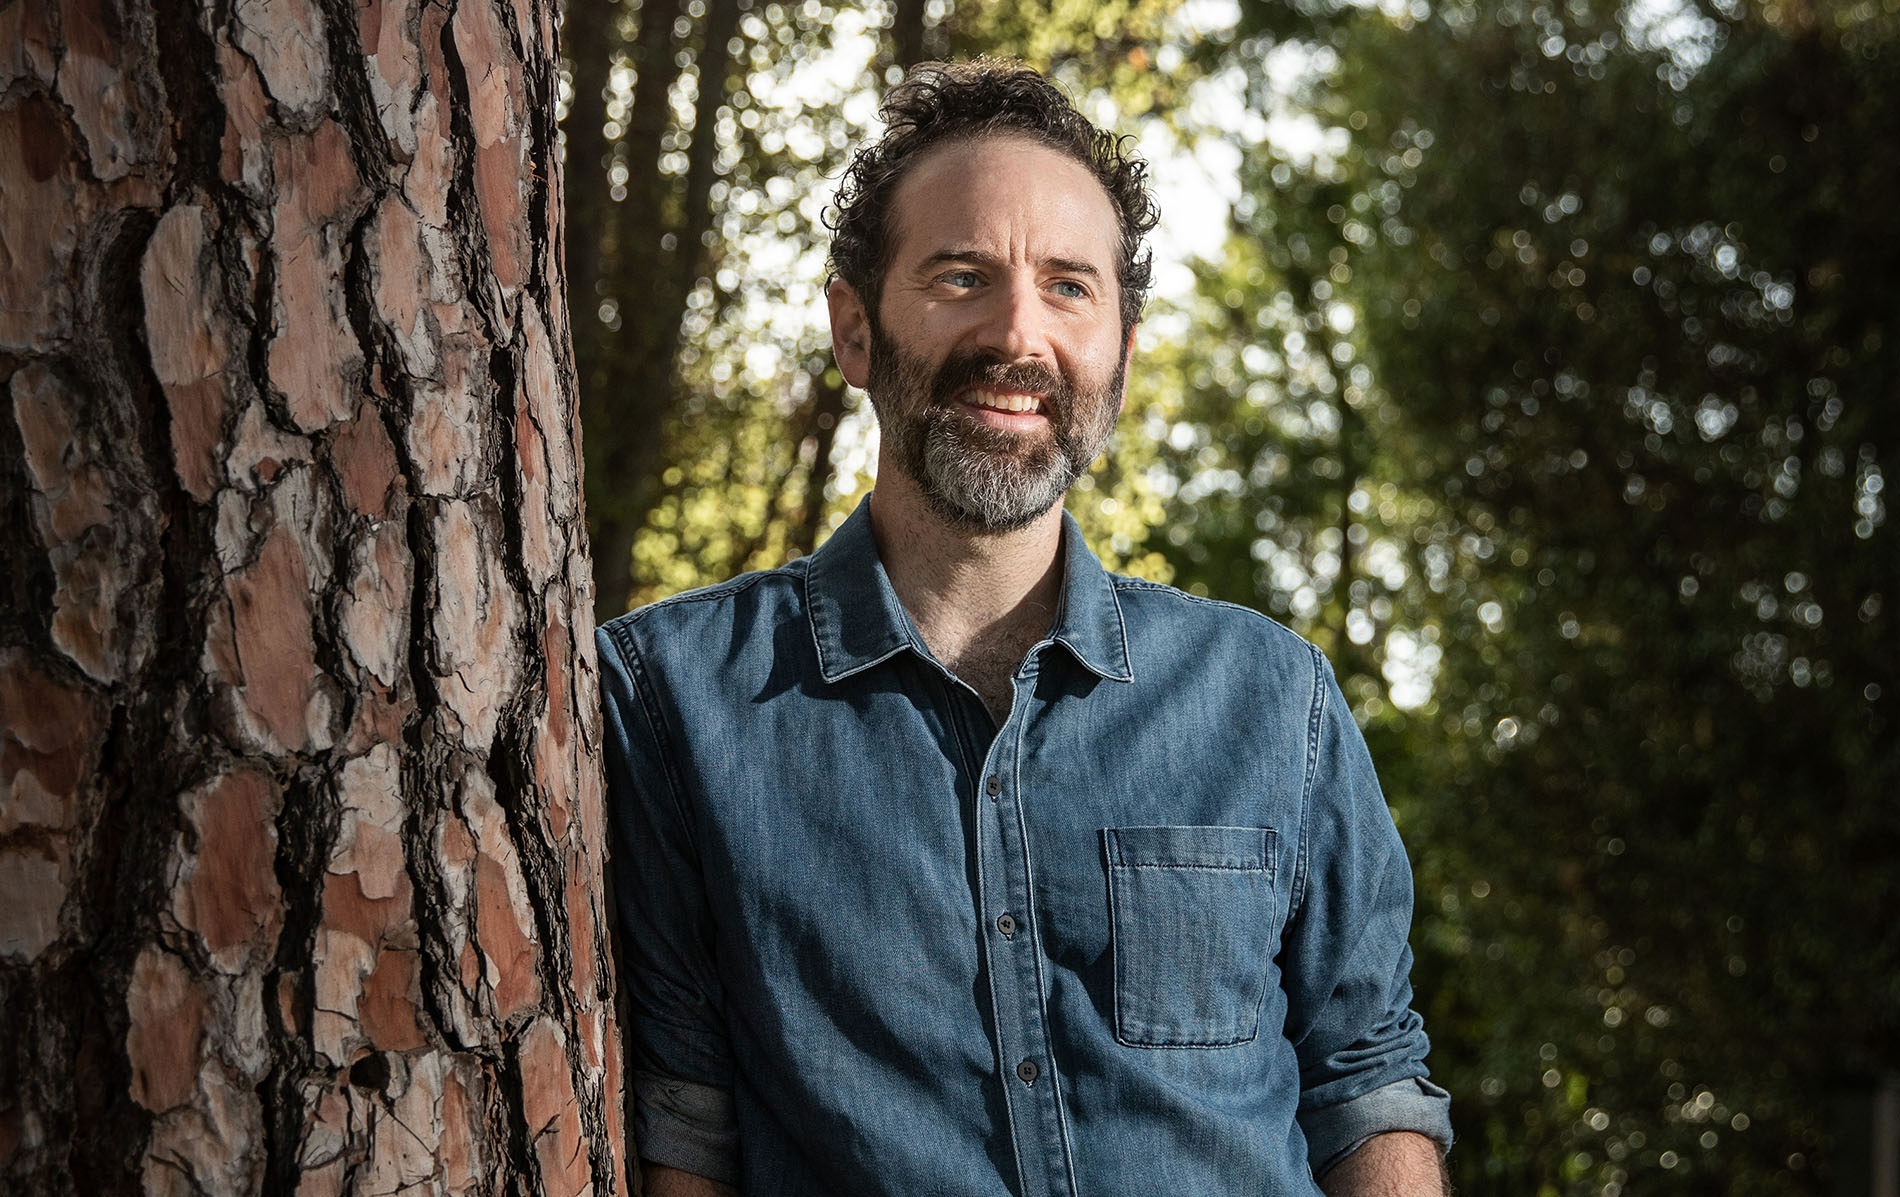 Image of Dan O'Brien leaning against a tree